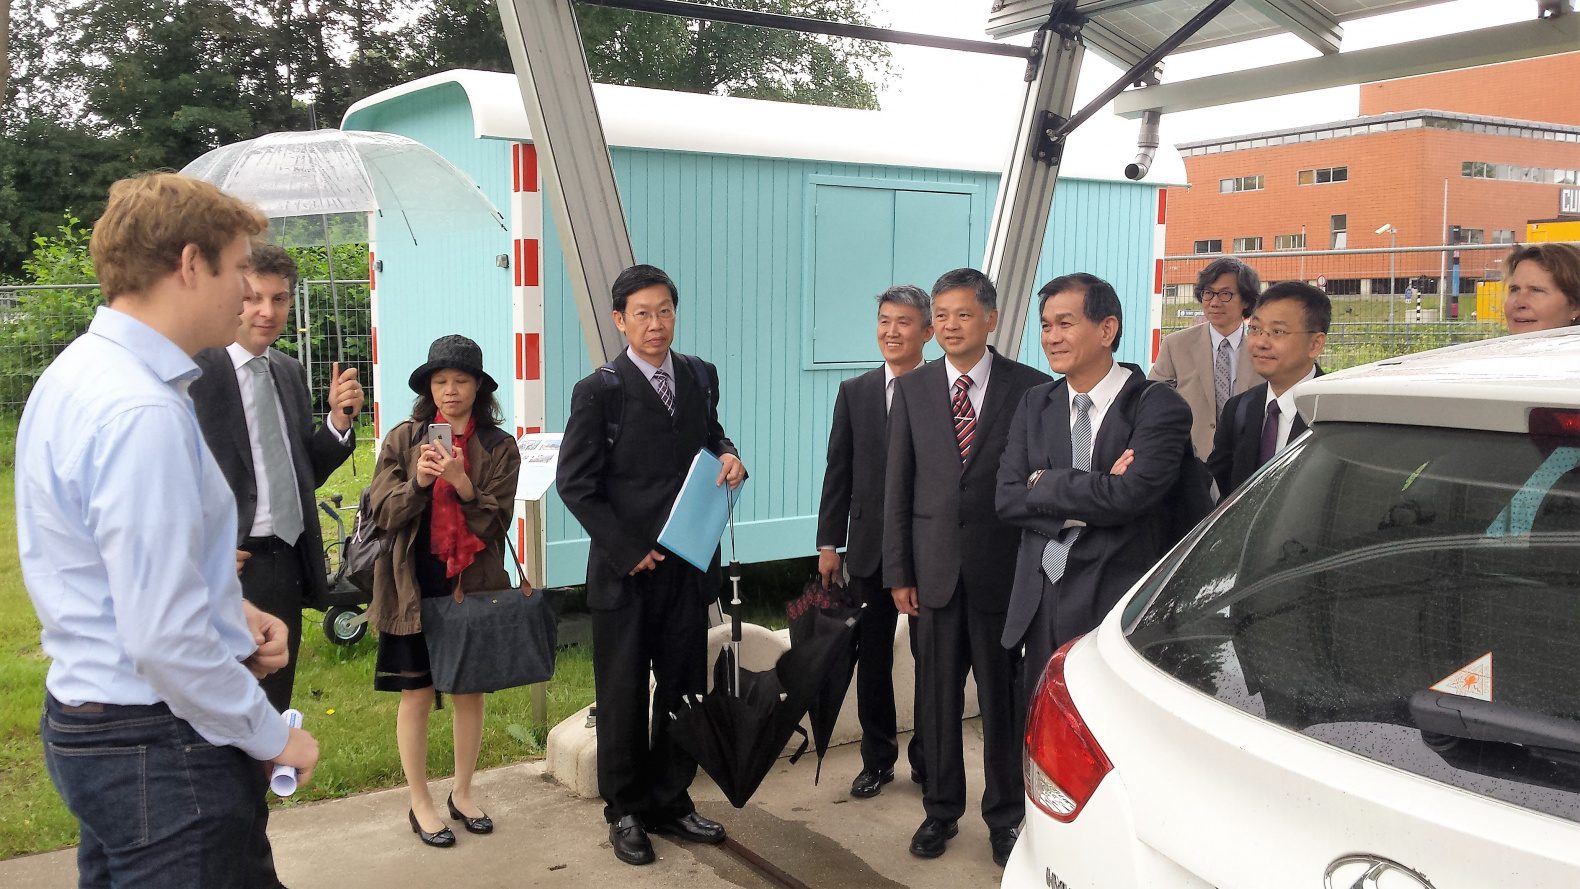 Vincent Oldenbroek TU Delft explains Car as Power Plant to Minister Yang from Taiwan